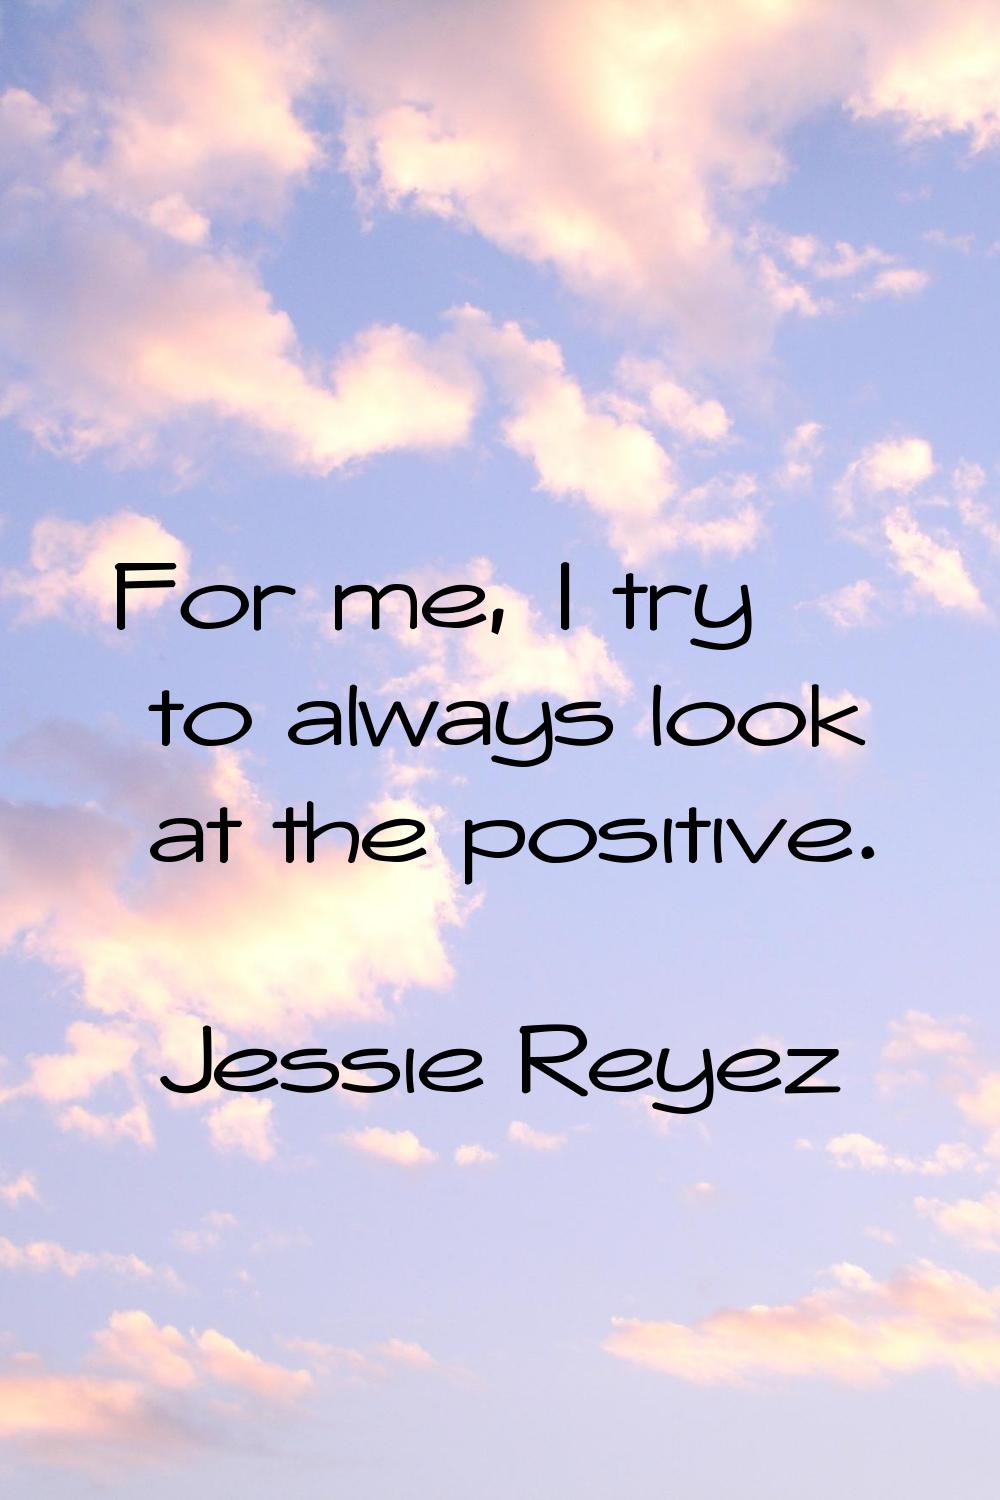 For me, I try to always look at the positive.